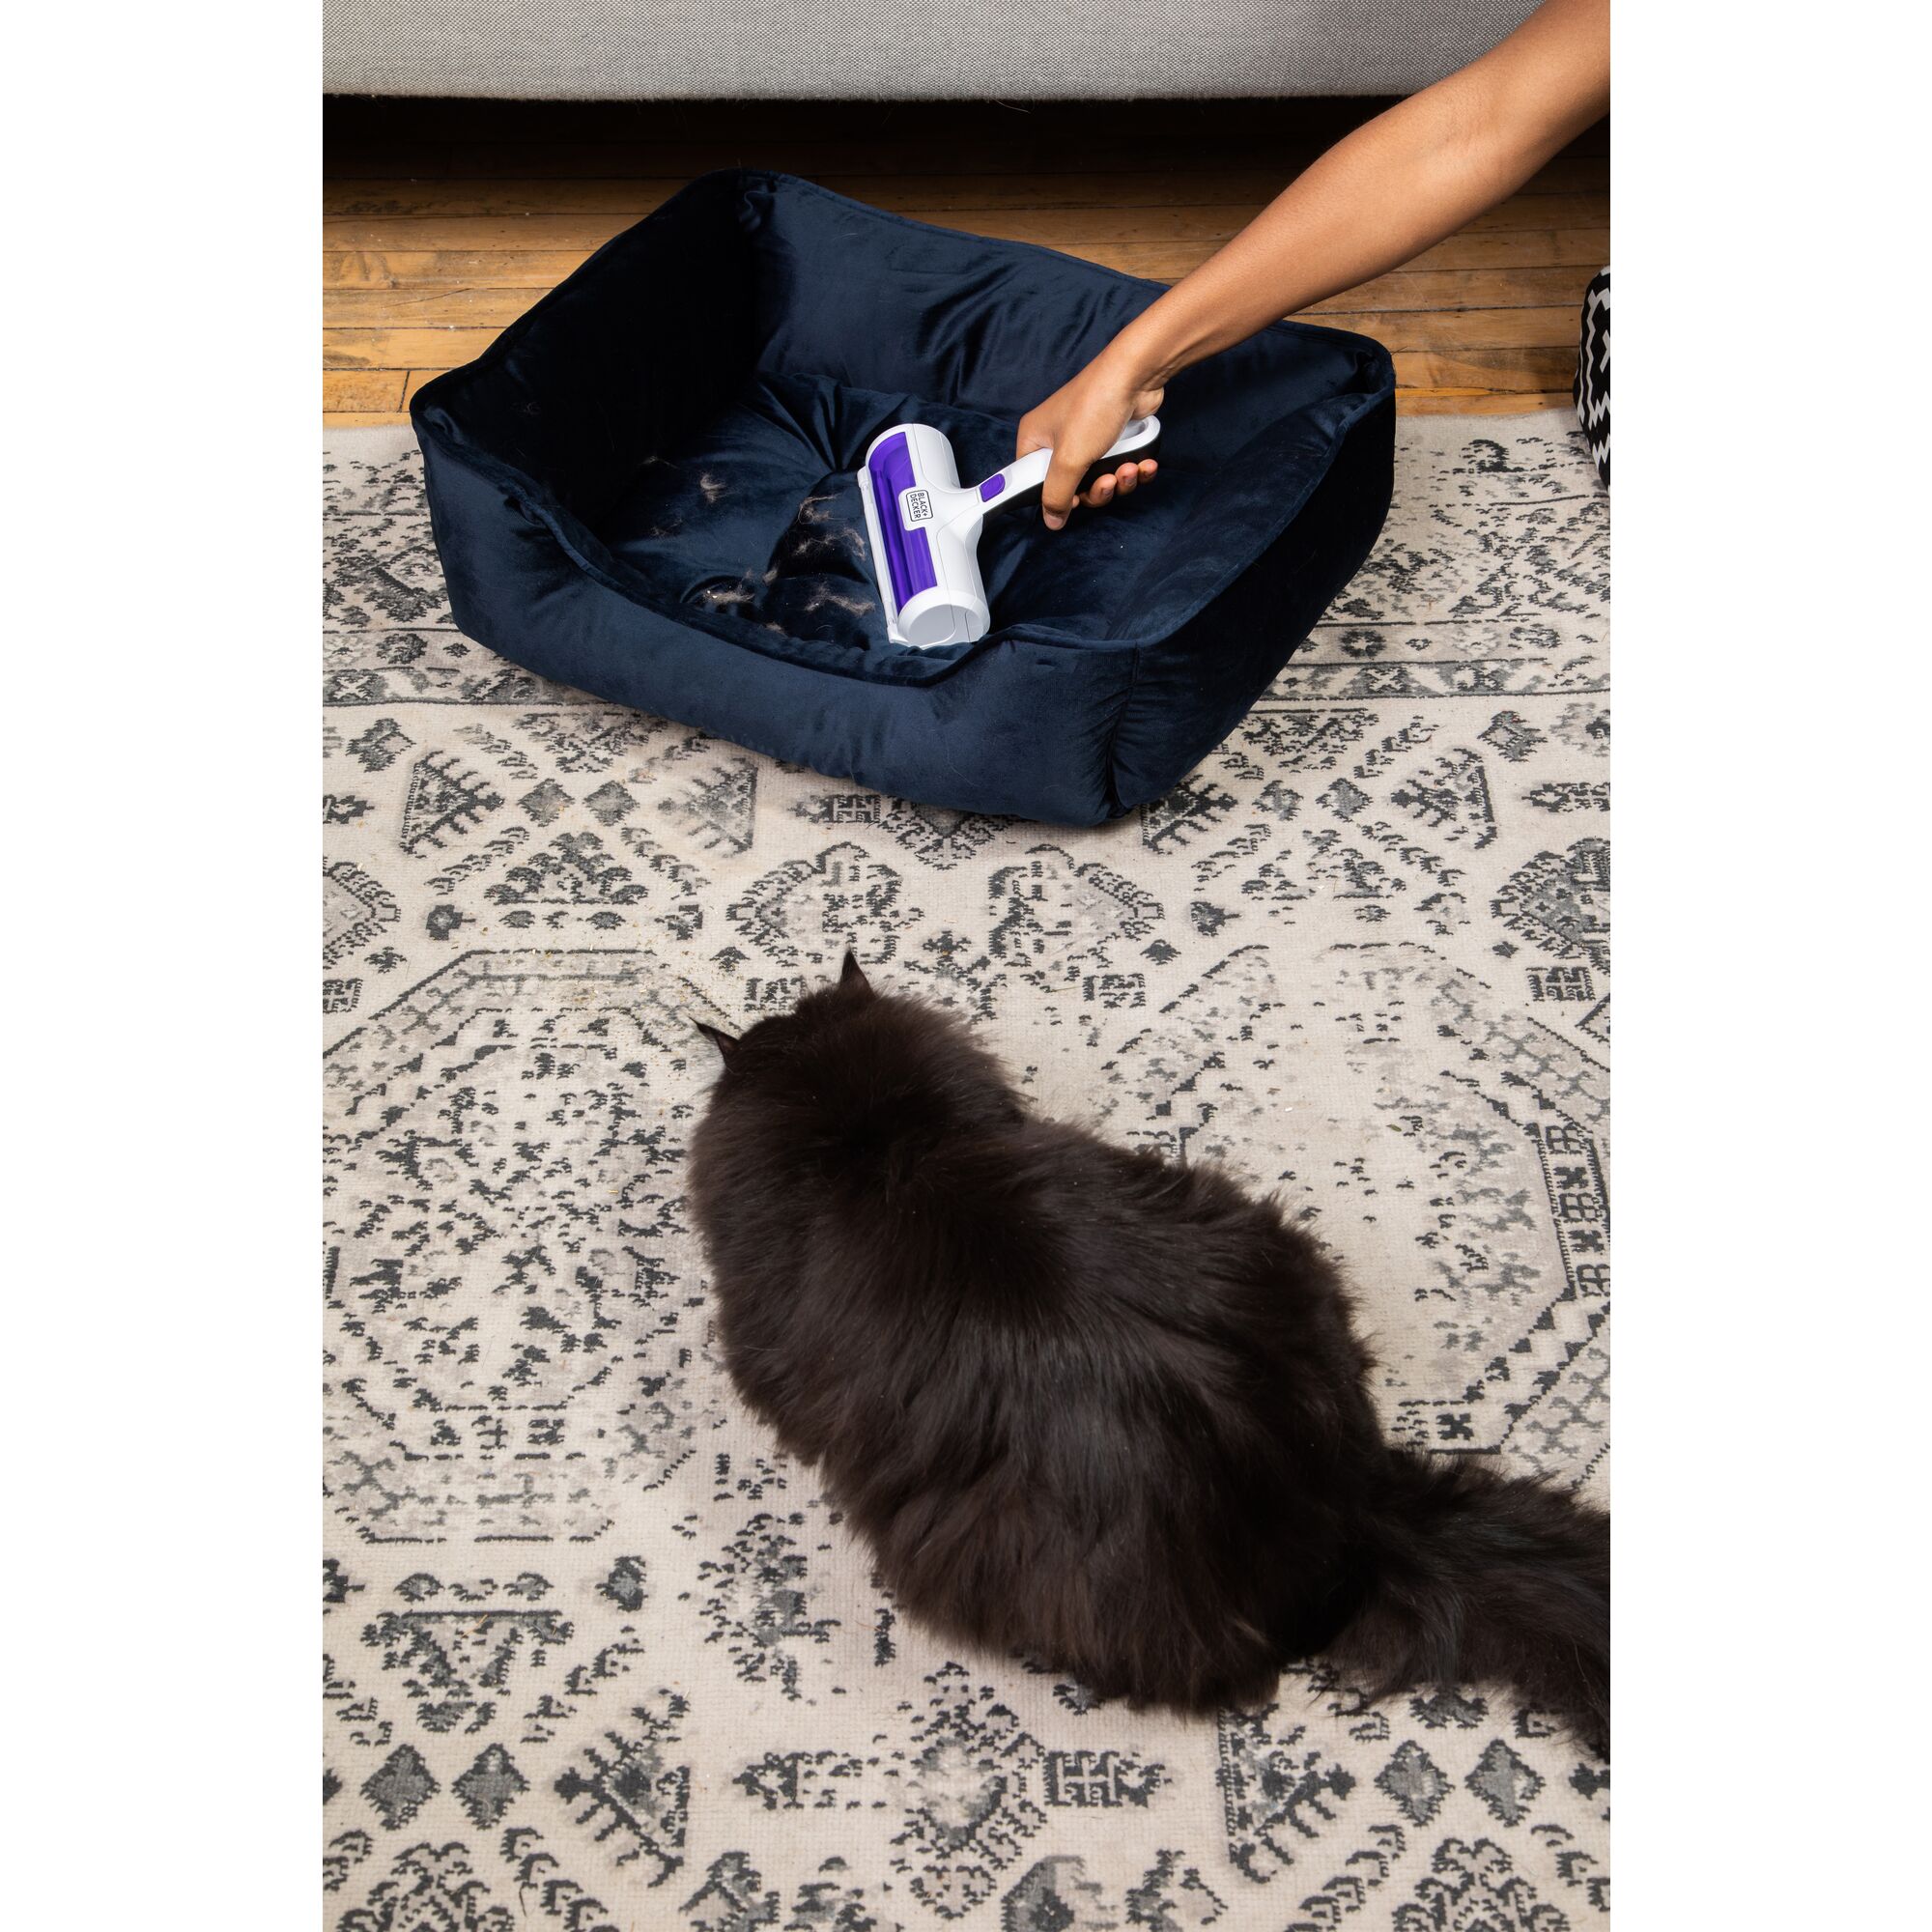 Person removing cat hair from a cat bed with the BLACK+DECKER Pet Hair Remover and a cat next to the bed.